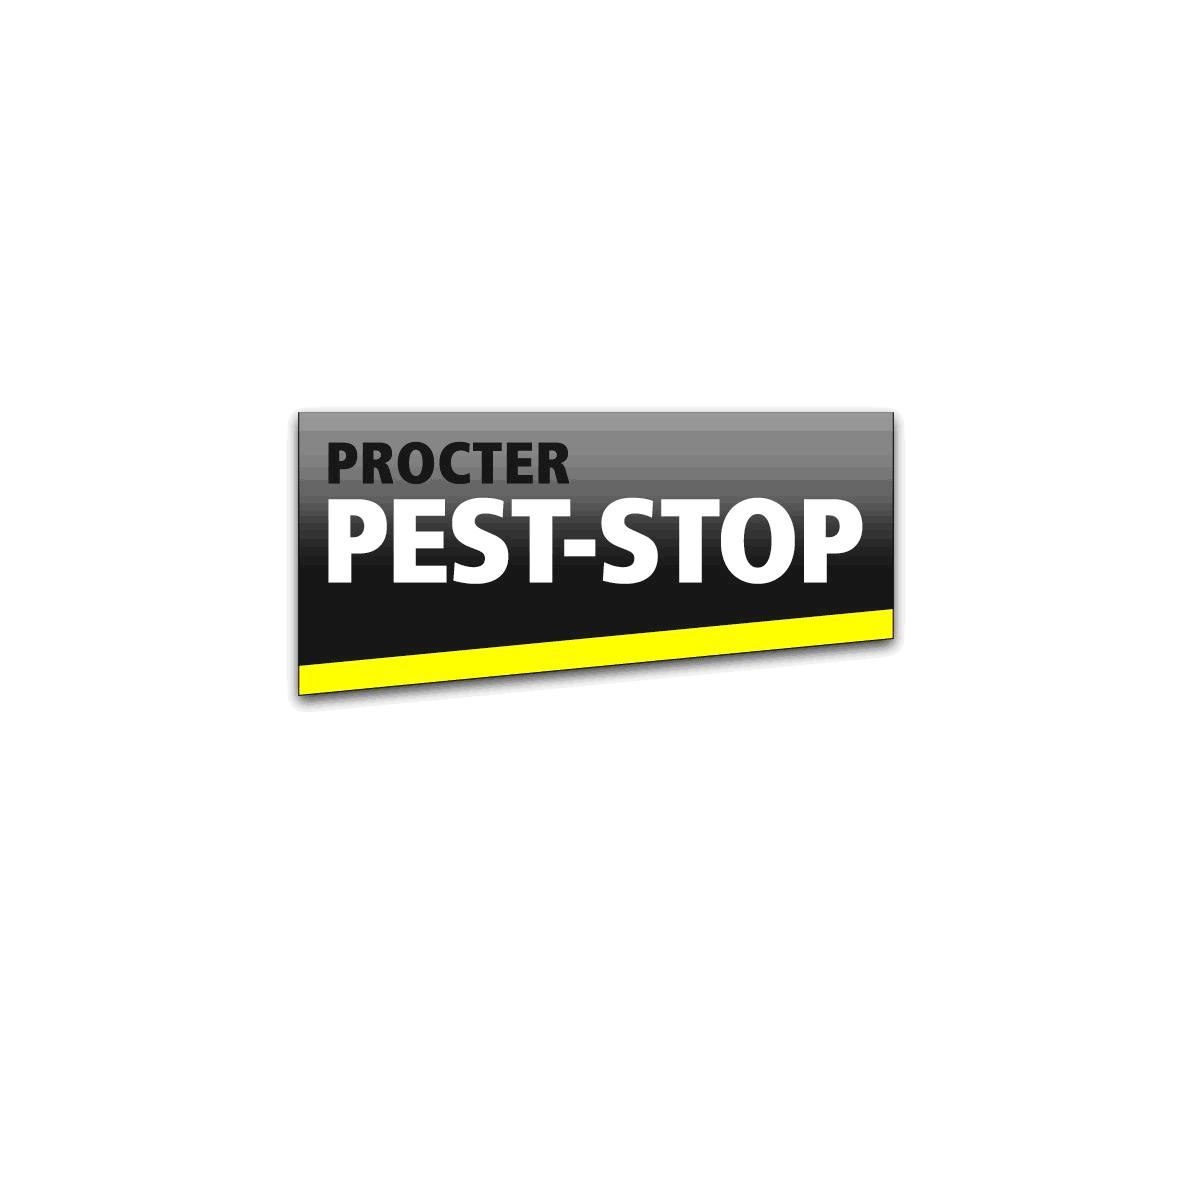 Where to Buy Pest-Stop Products